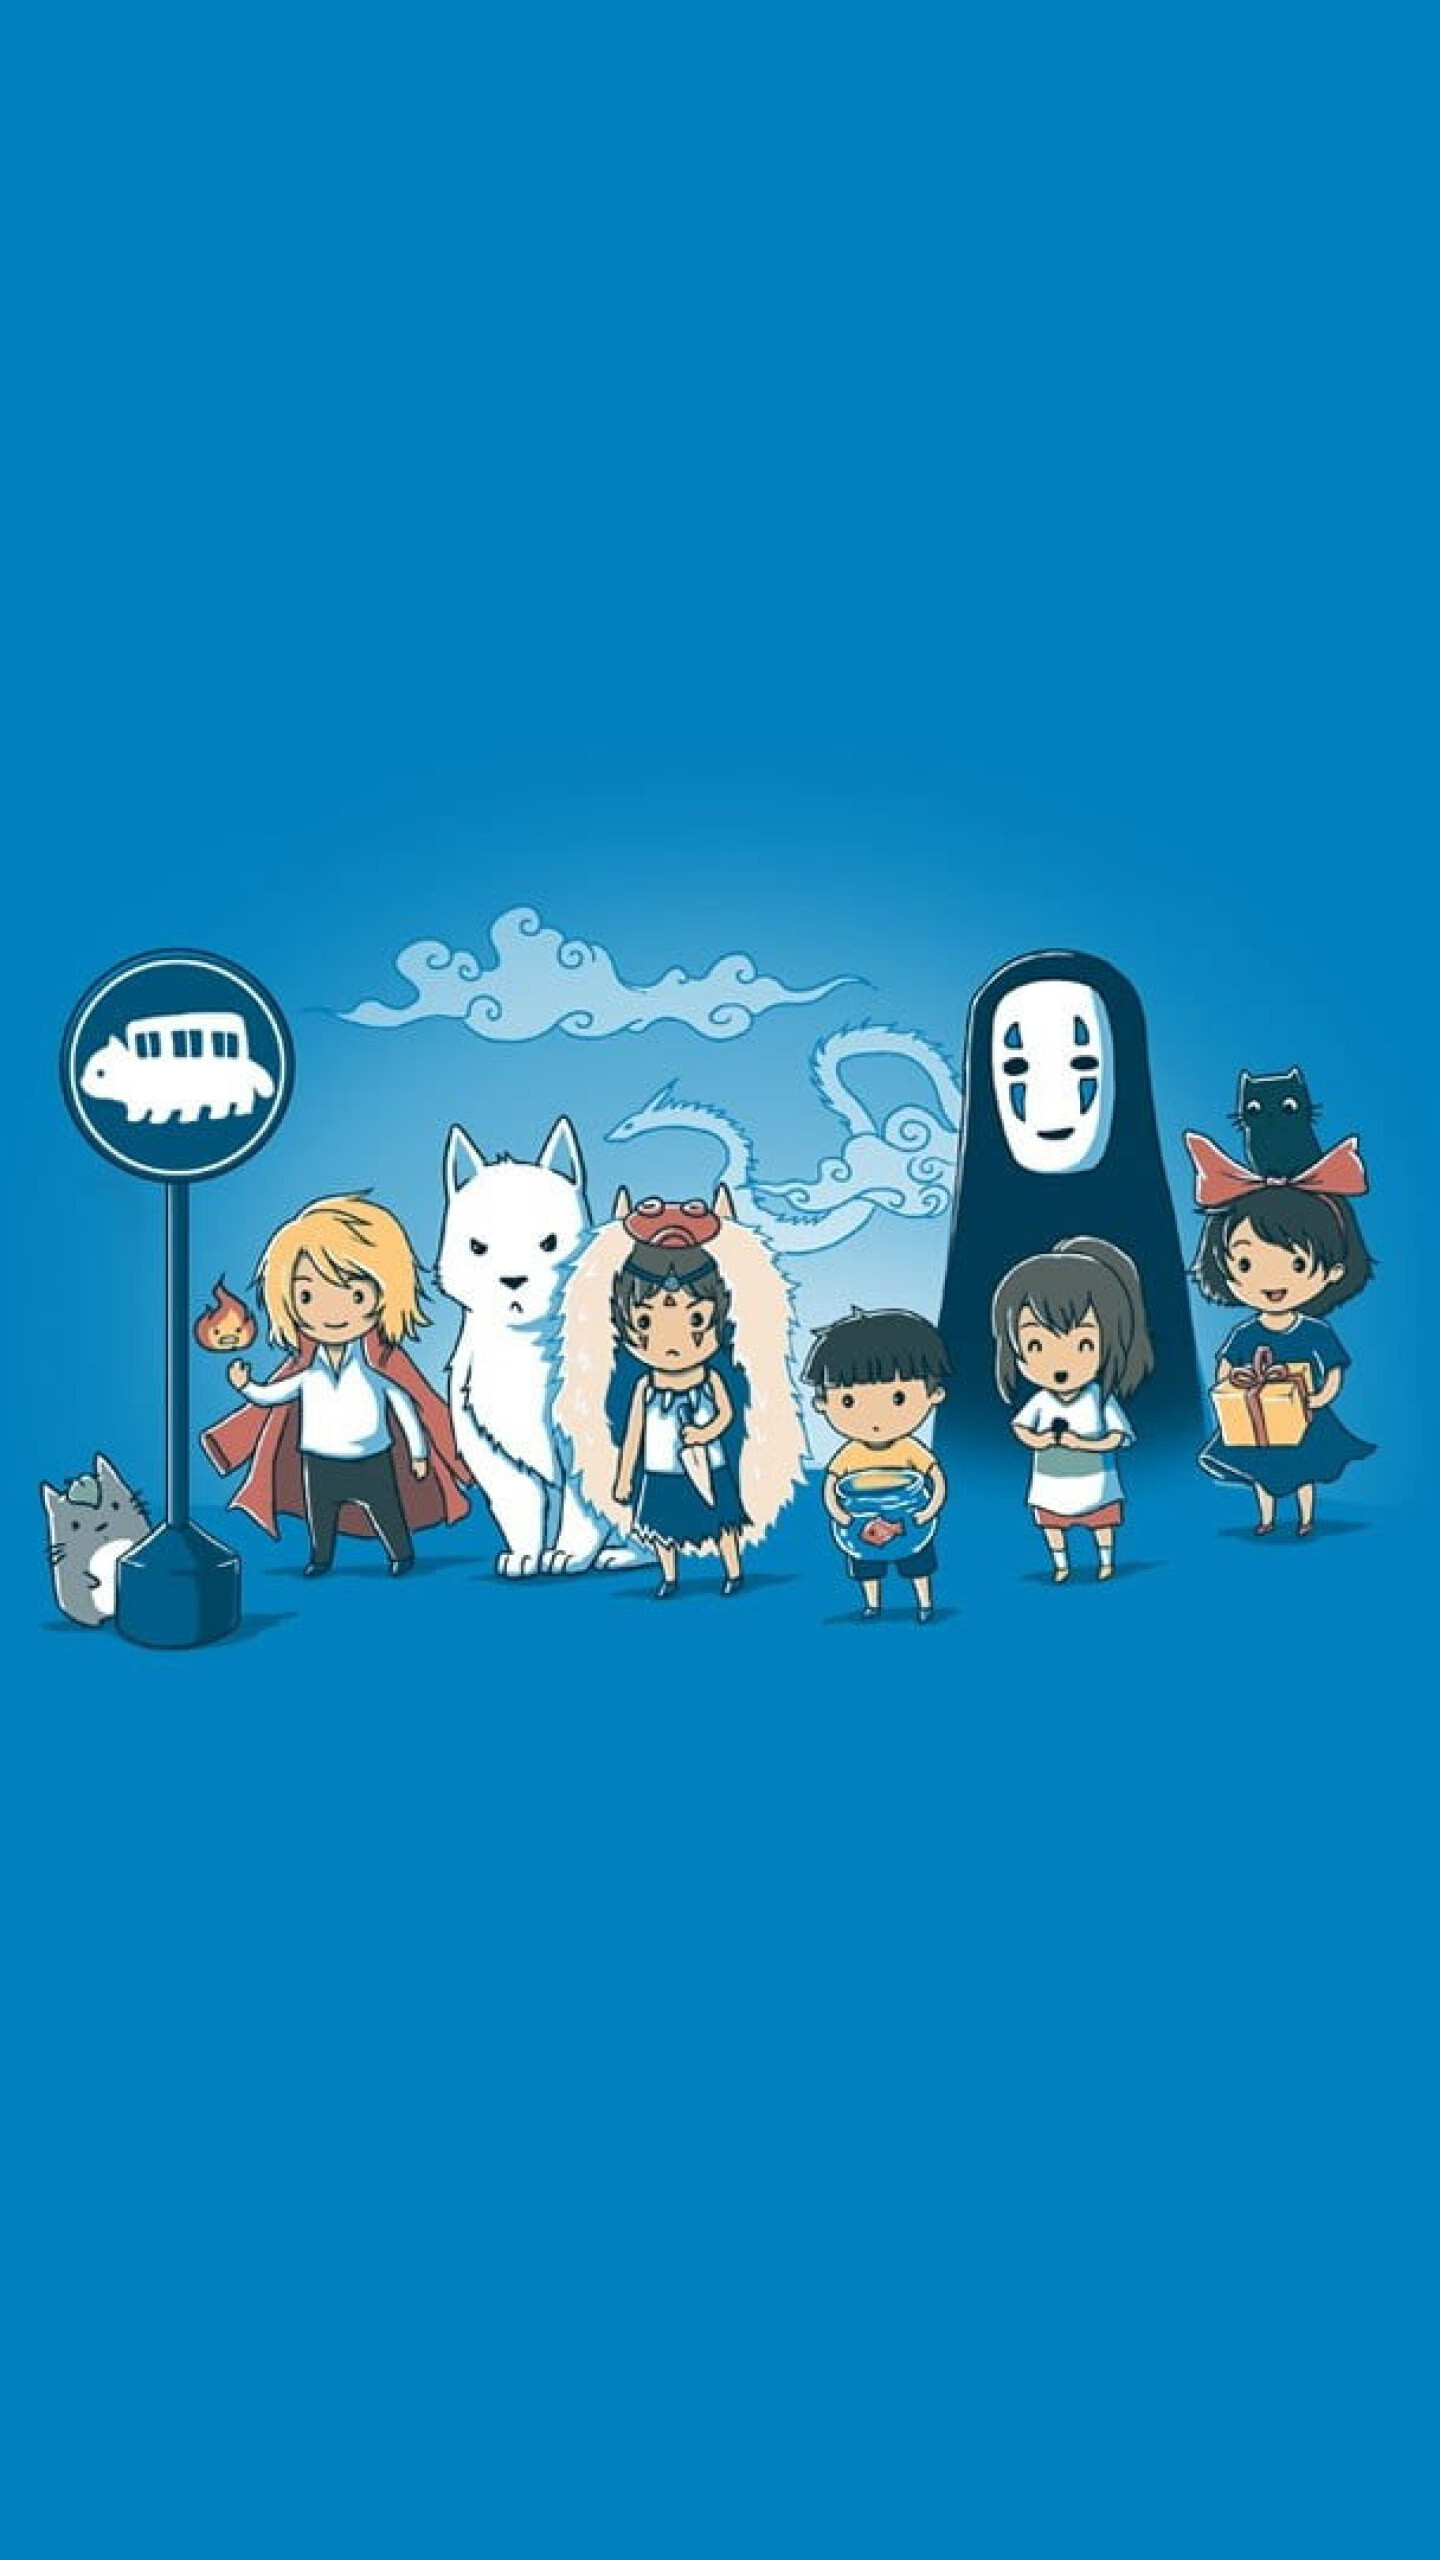 Studio Ghibli: The company has produced a total of 23 feature films. 1440x2560 HD Wallpaper.